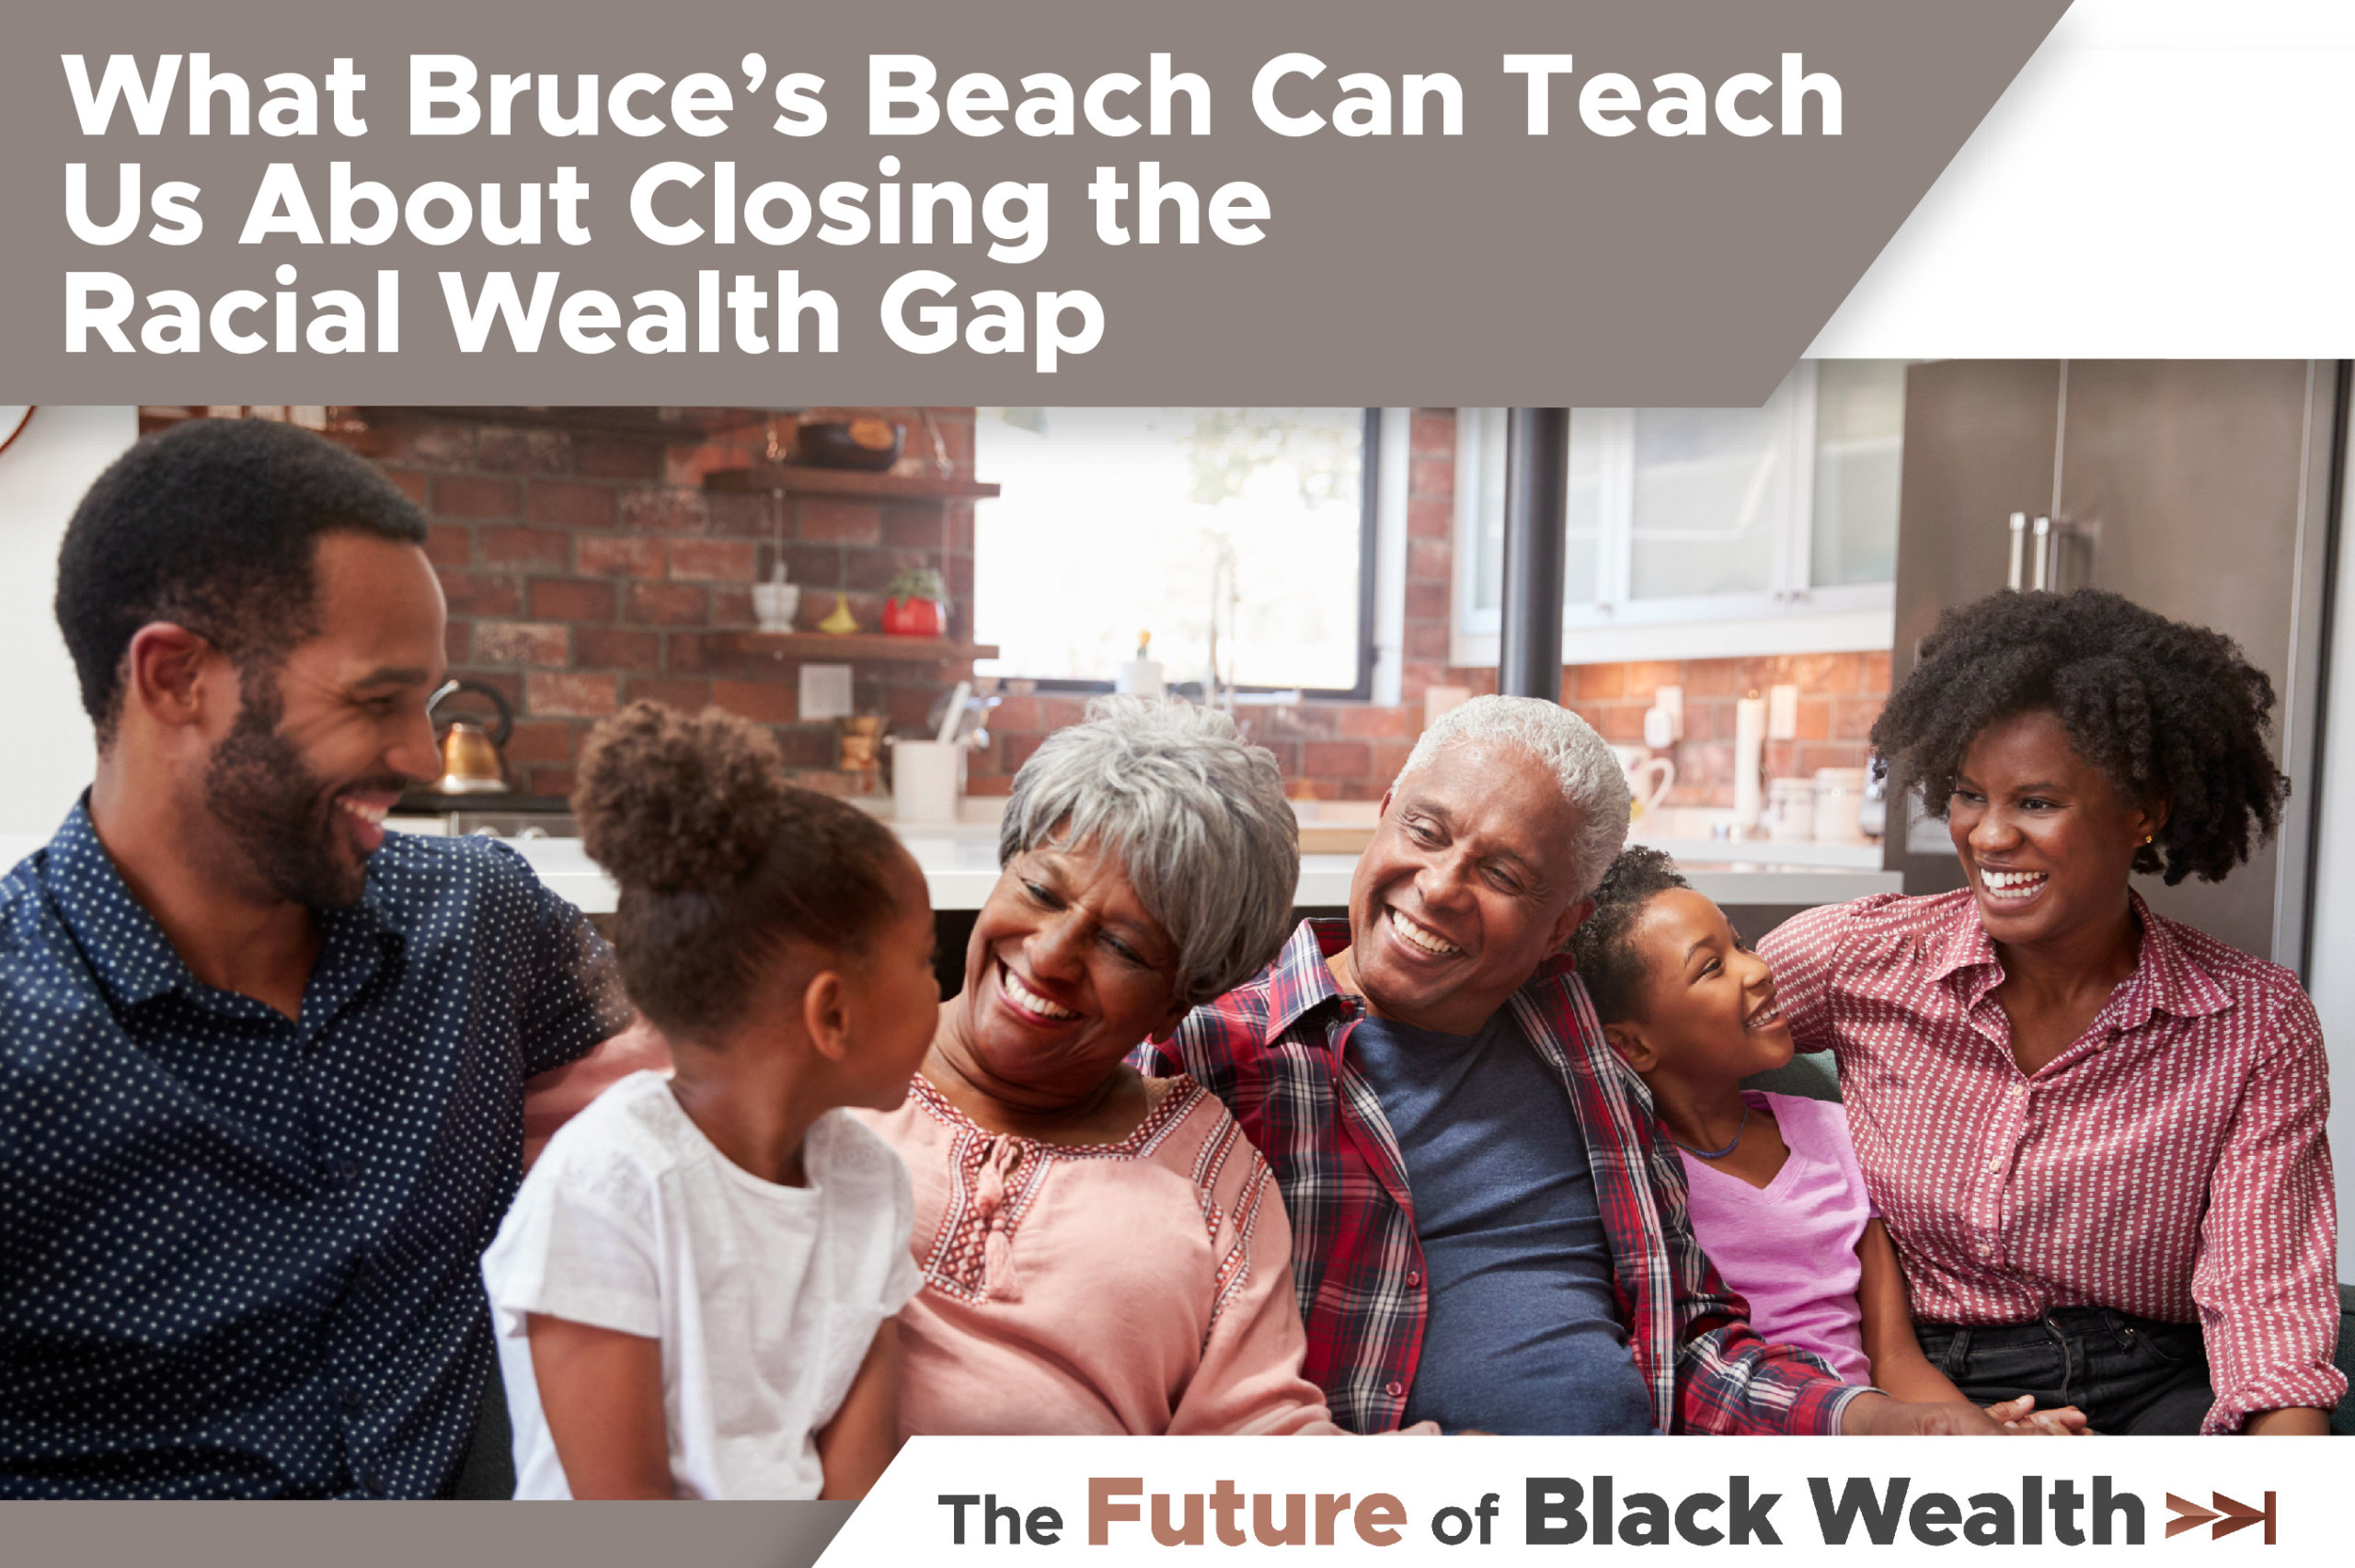 What Bruce’s Beach Can Teach Us About Closing the Racial Wealth Gap